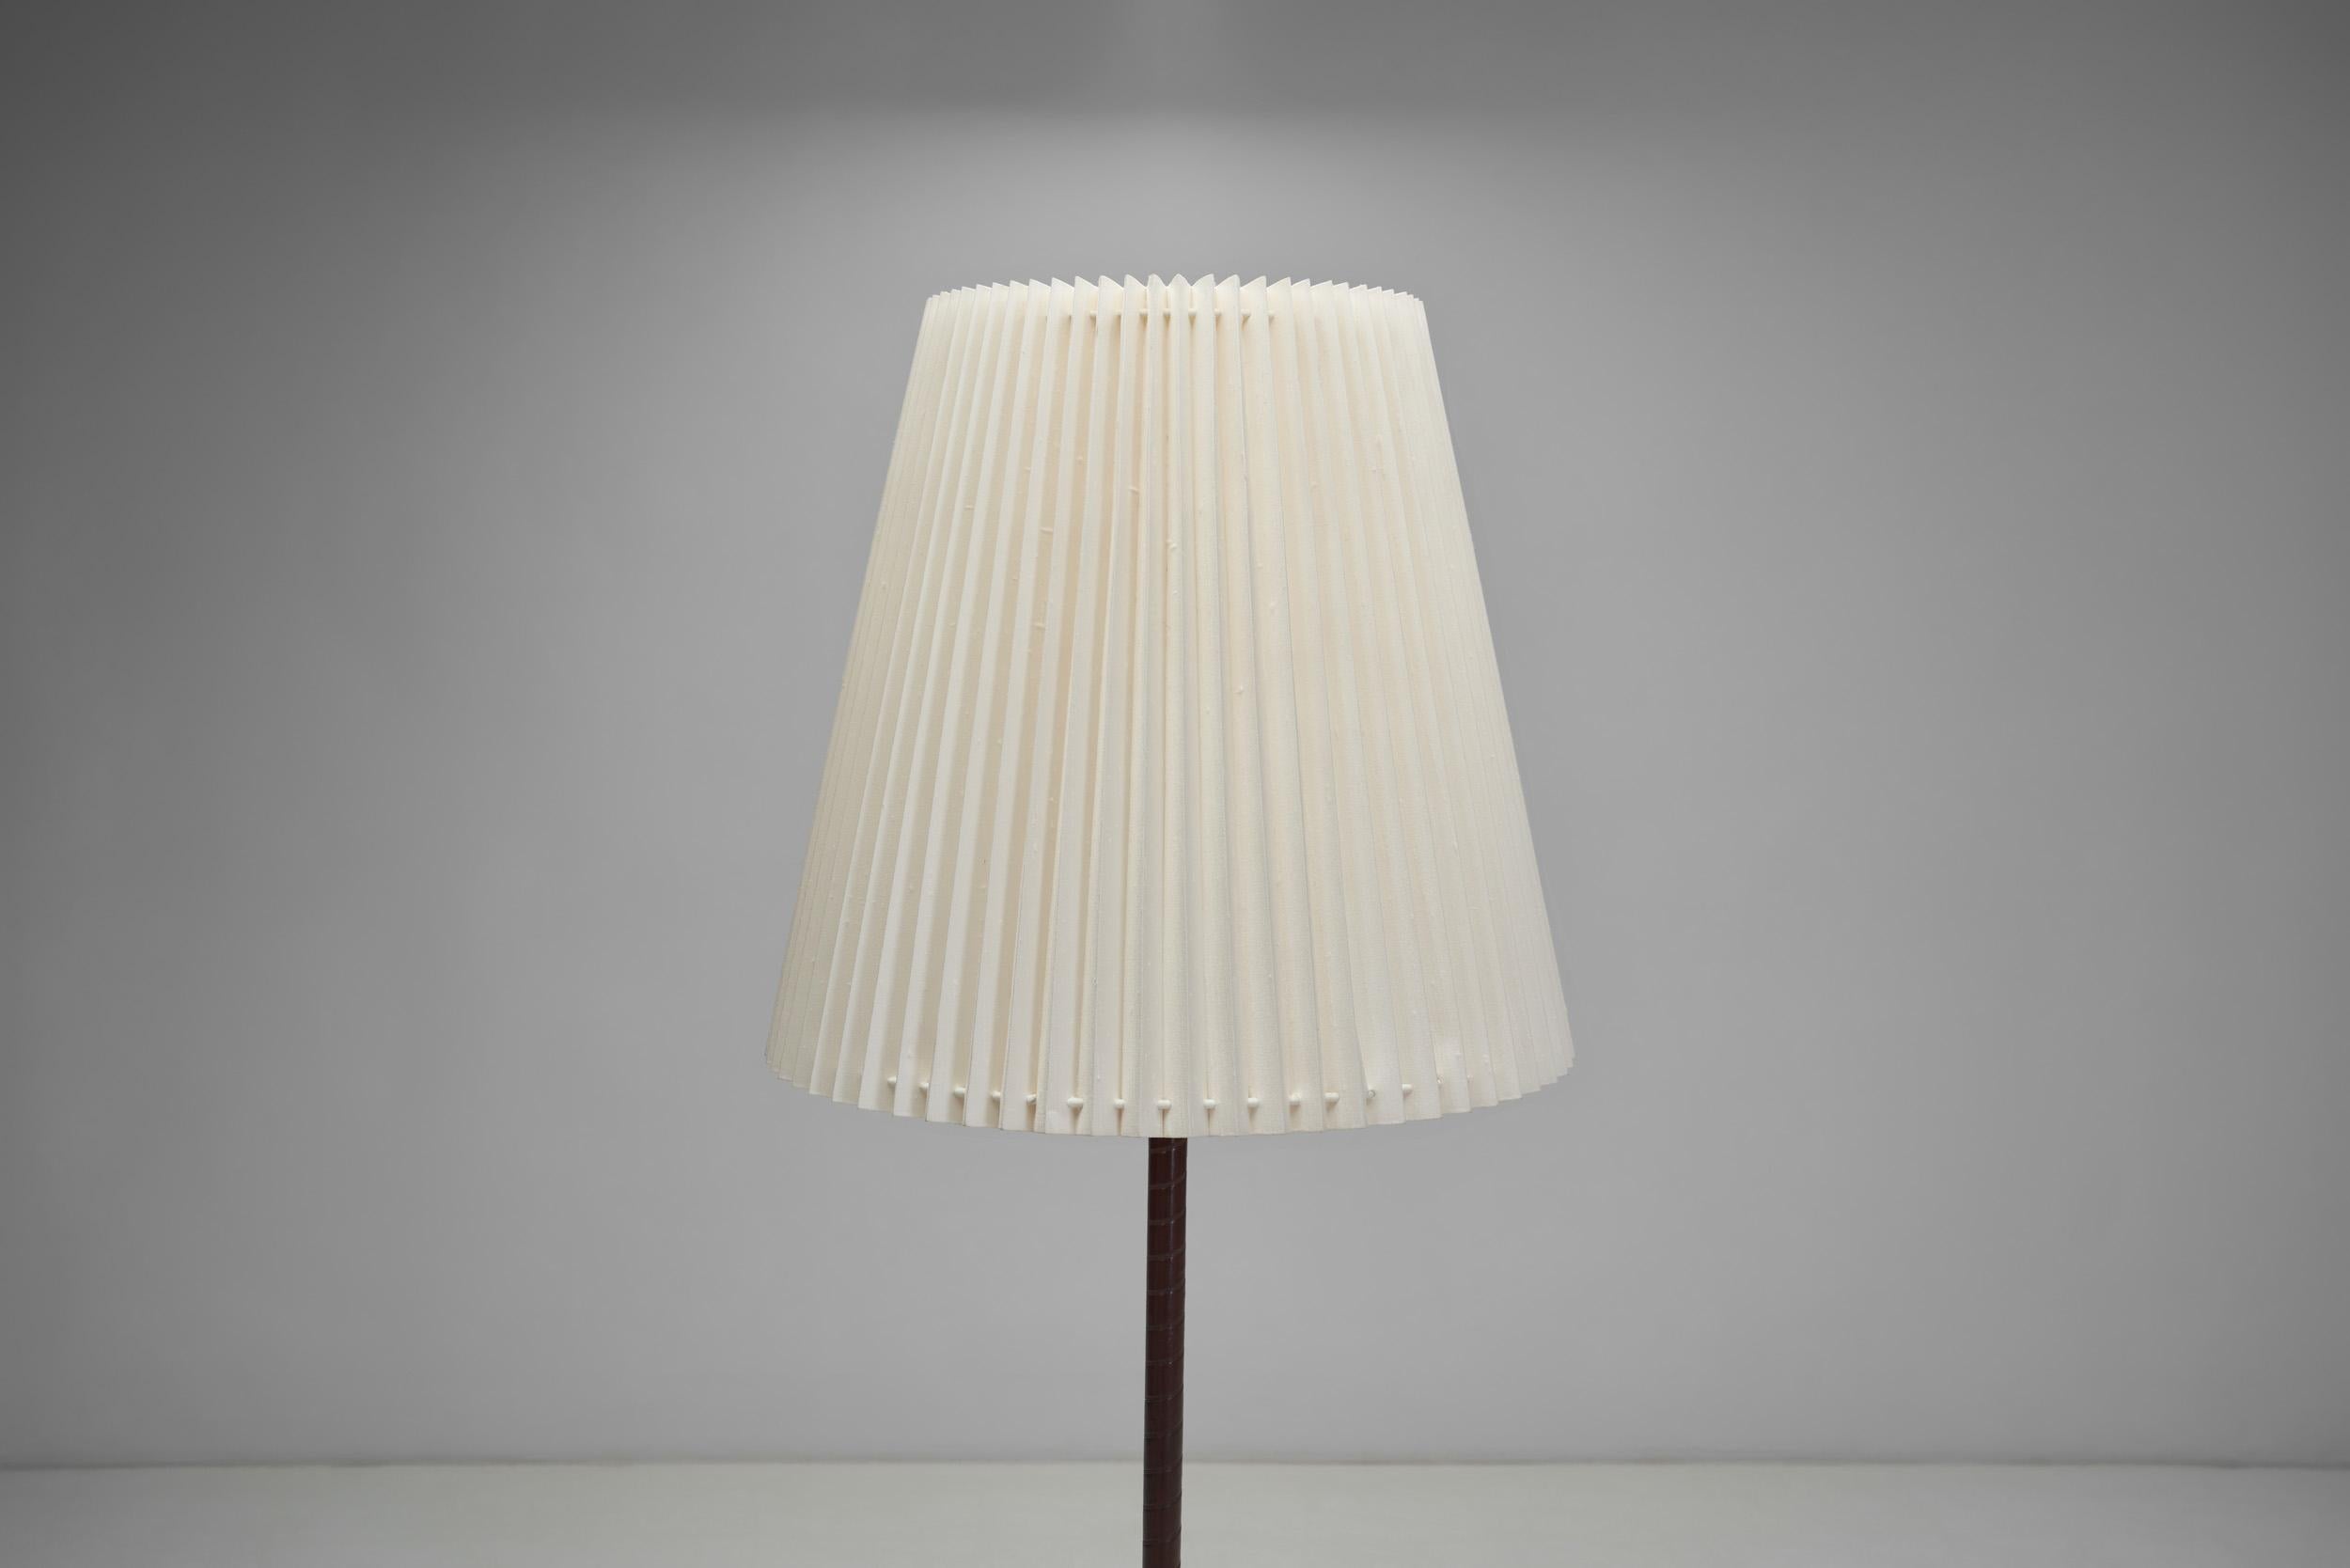 Lisa Johansson-Pape Brass Floor Lamp for Stockmann Orno, Finland 1950s For Sale 1